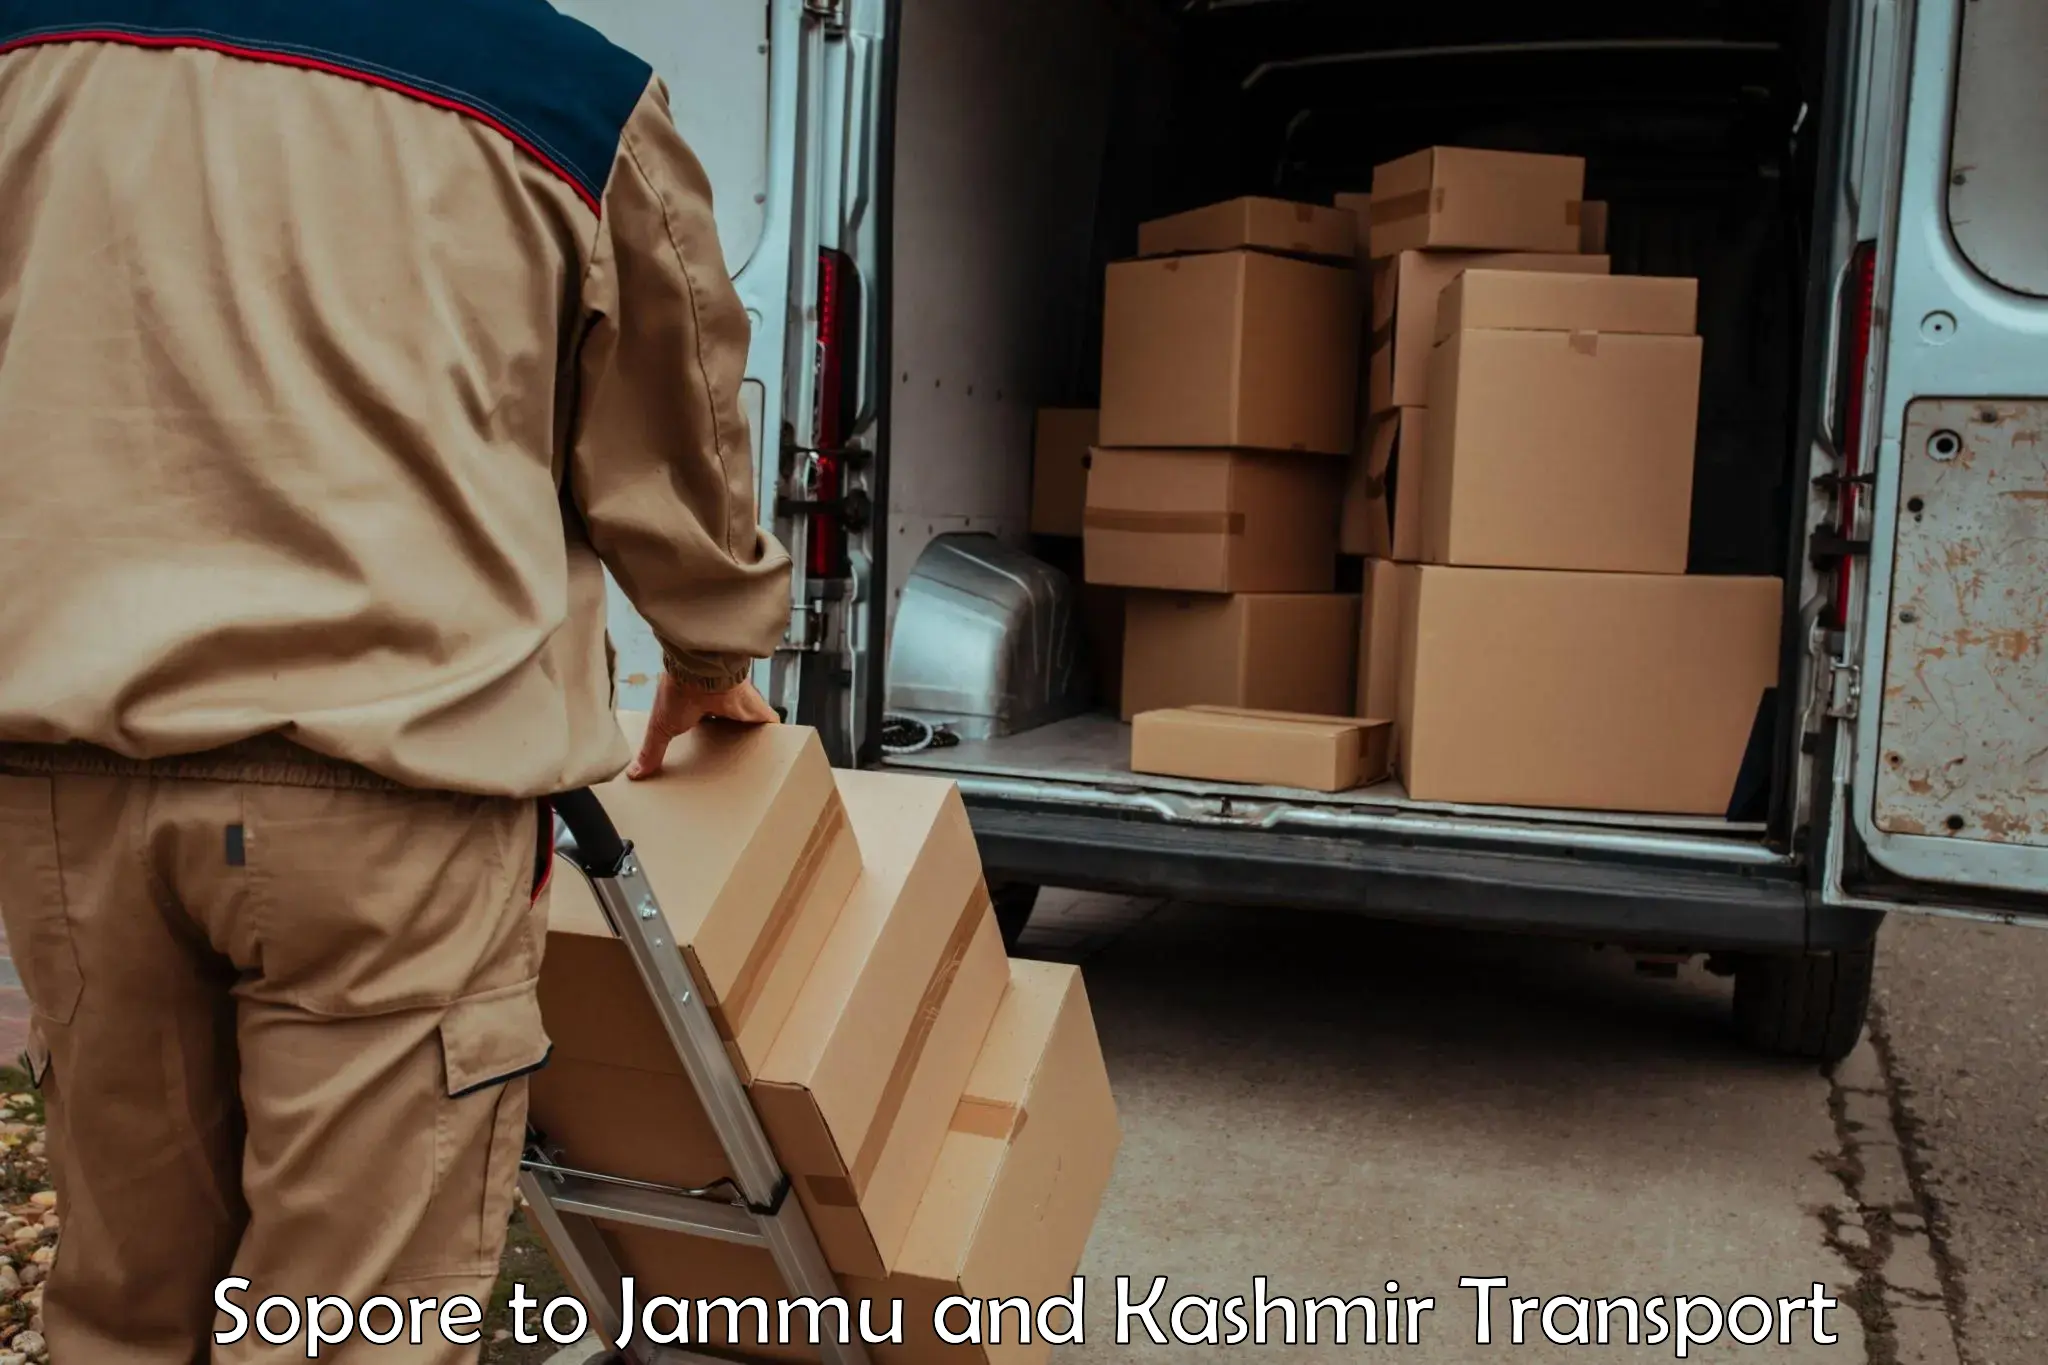 Commercial transport service Sopore to Chenani